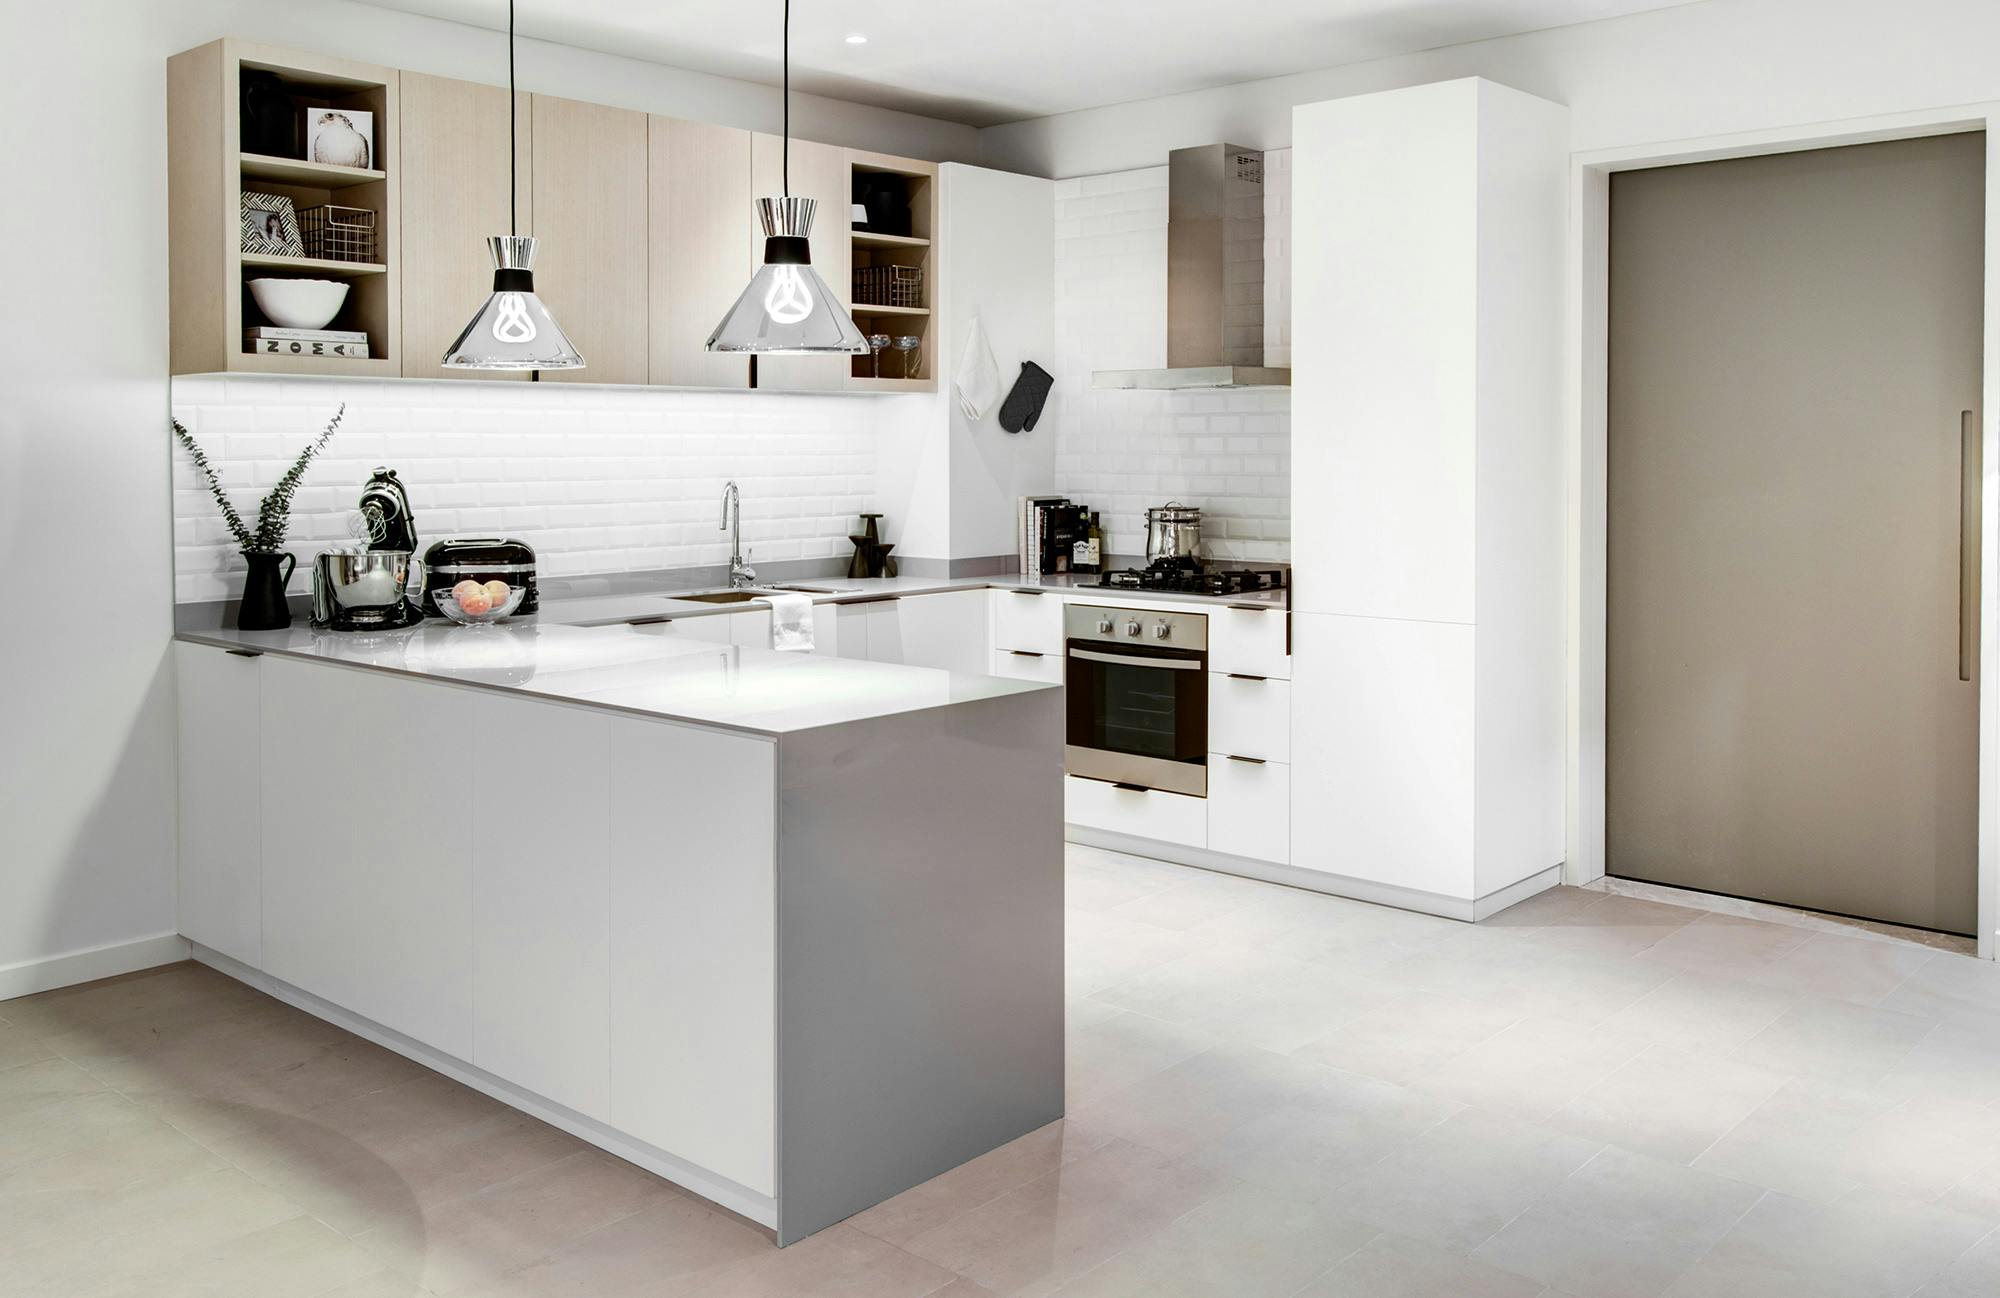 Numéro d'image 35 de la section actuelle de Dekton Sirius adds a welcoming touch to the kitchens of a residential development in Dubai de Cosentino France